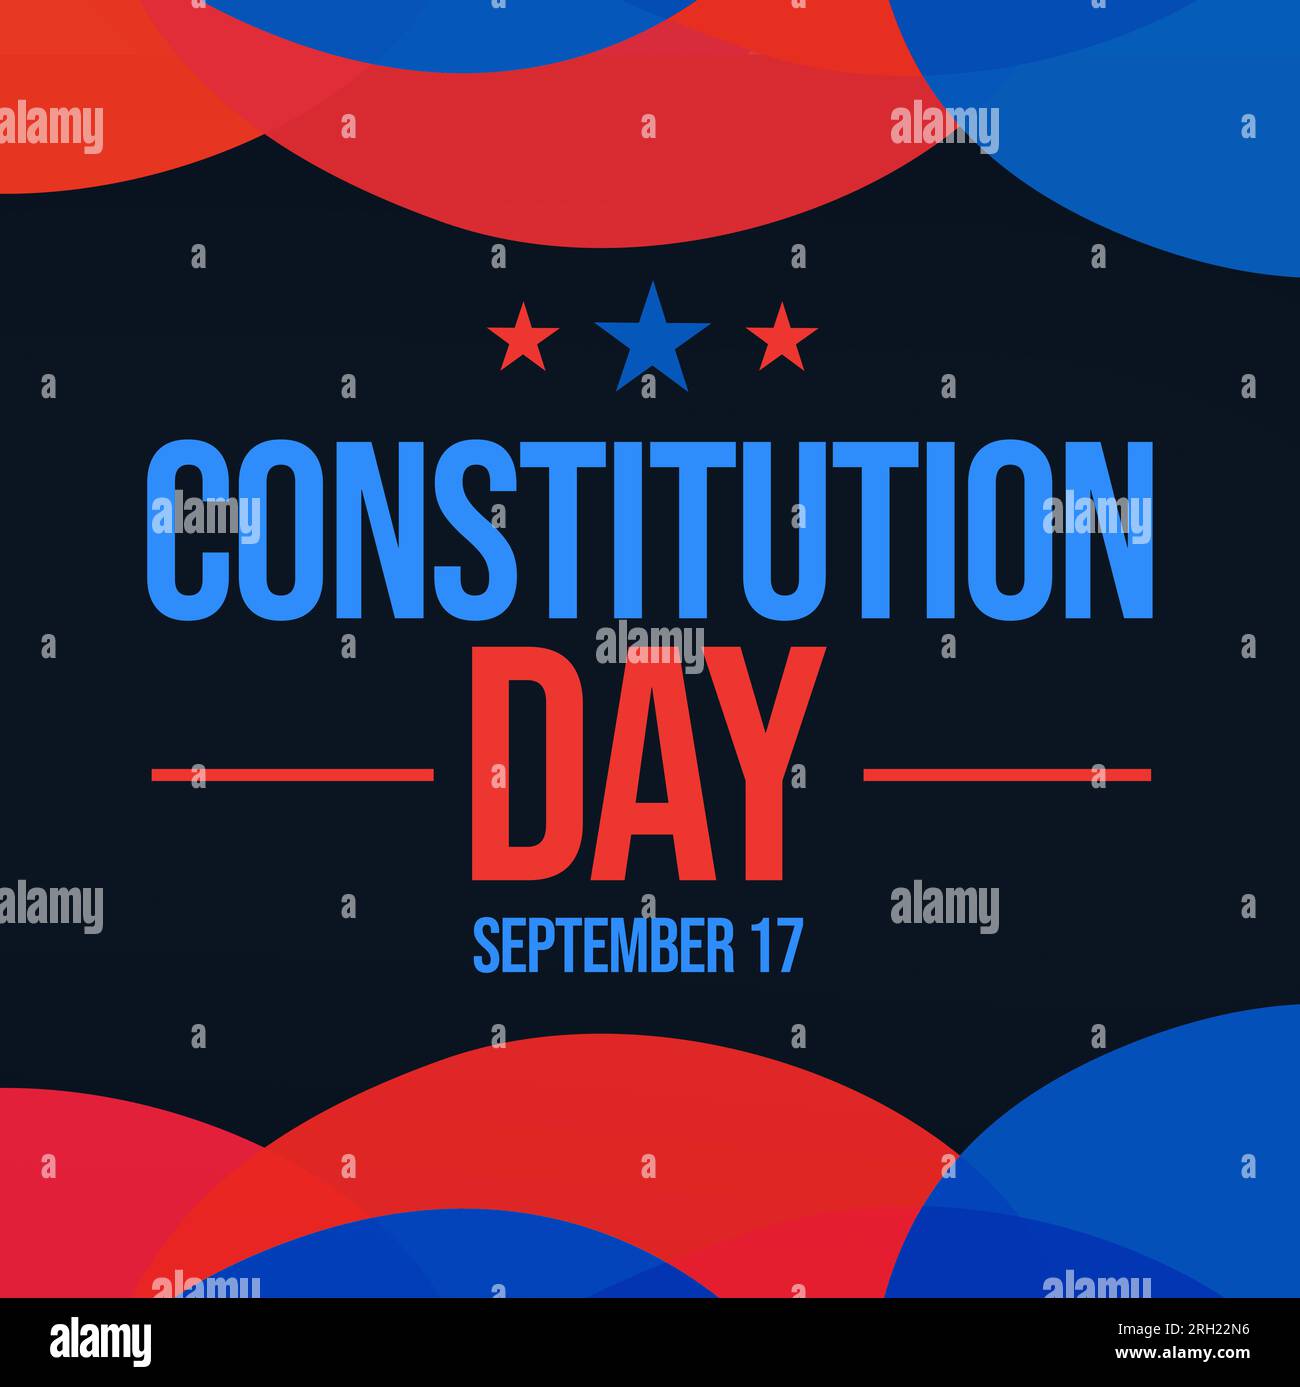 September 17 is Constitution Day in America, background wallpaper design with typography and colorful shapes Stock Photo